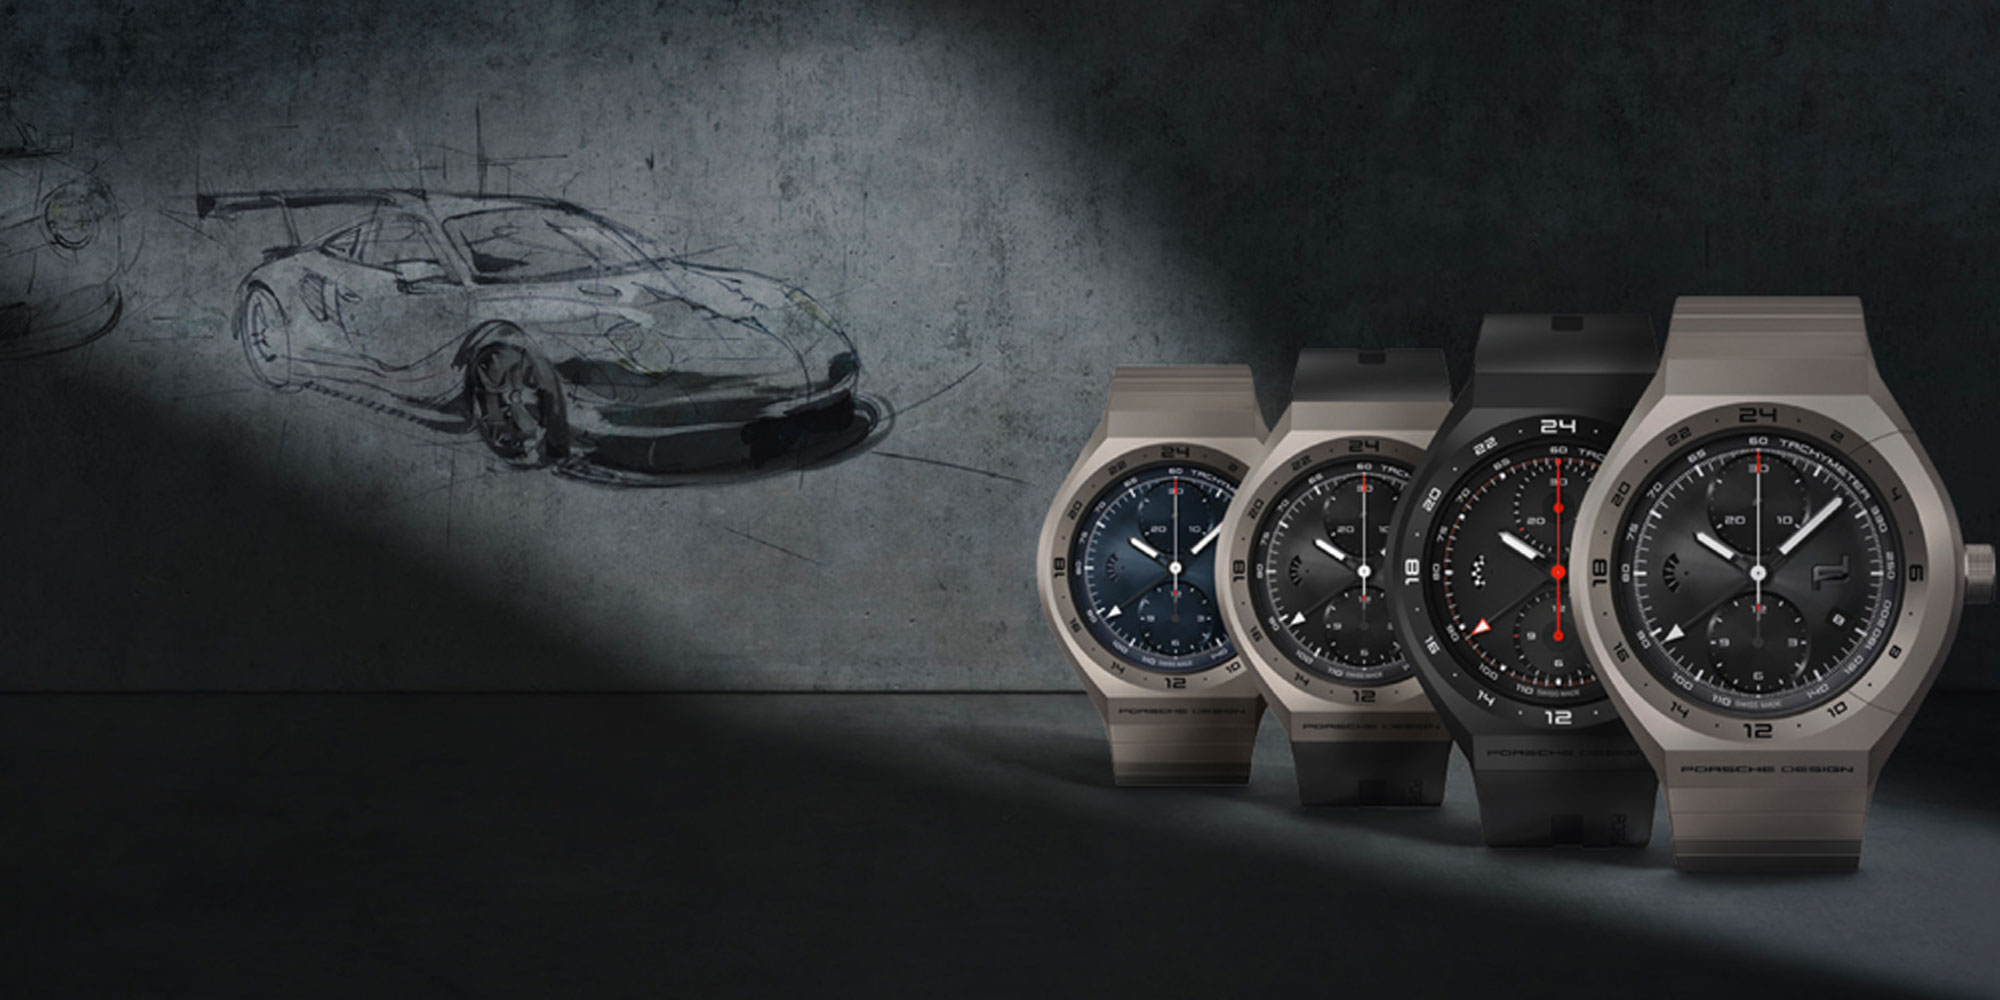 Porsche Design Timepieces show off your vehicle love - 9to5Toys